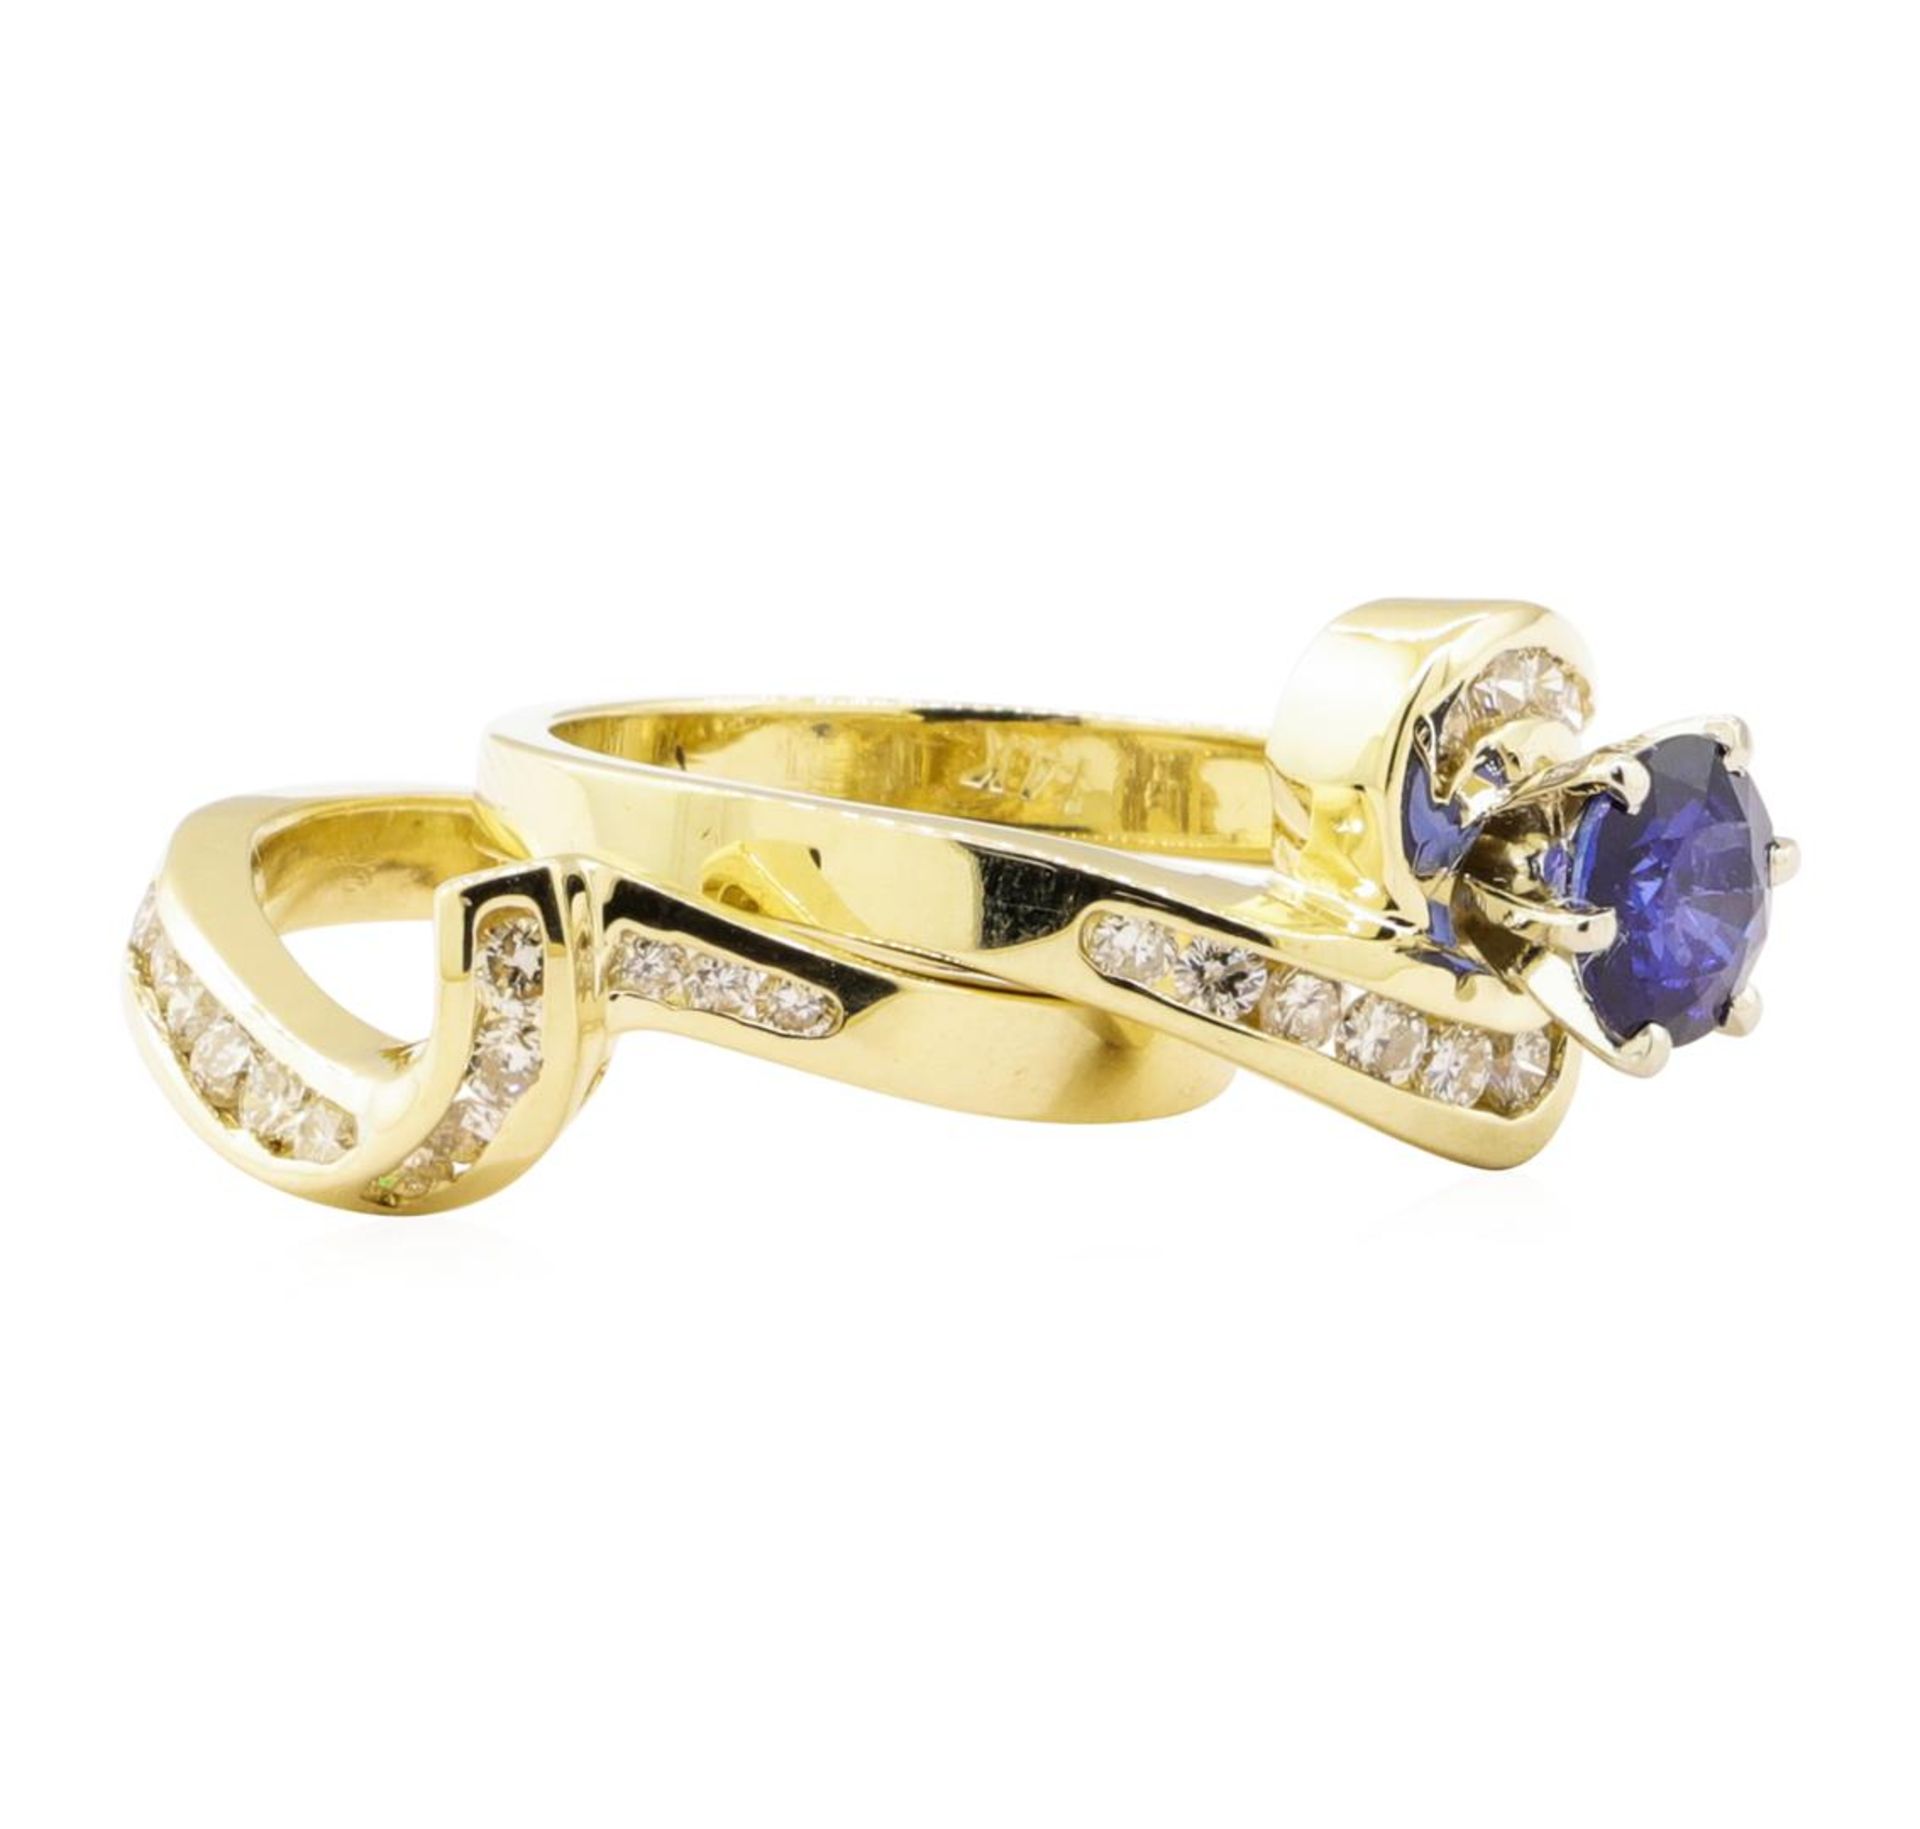 1.47 ctw Blue Sapphire And Diamond Ring And Band - 14KT Yellow Gold - Image 3 of 4